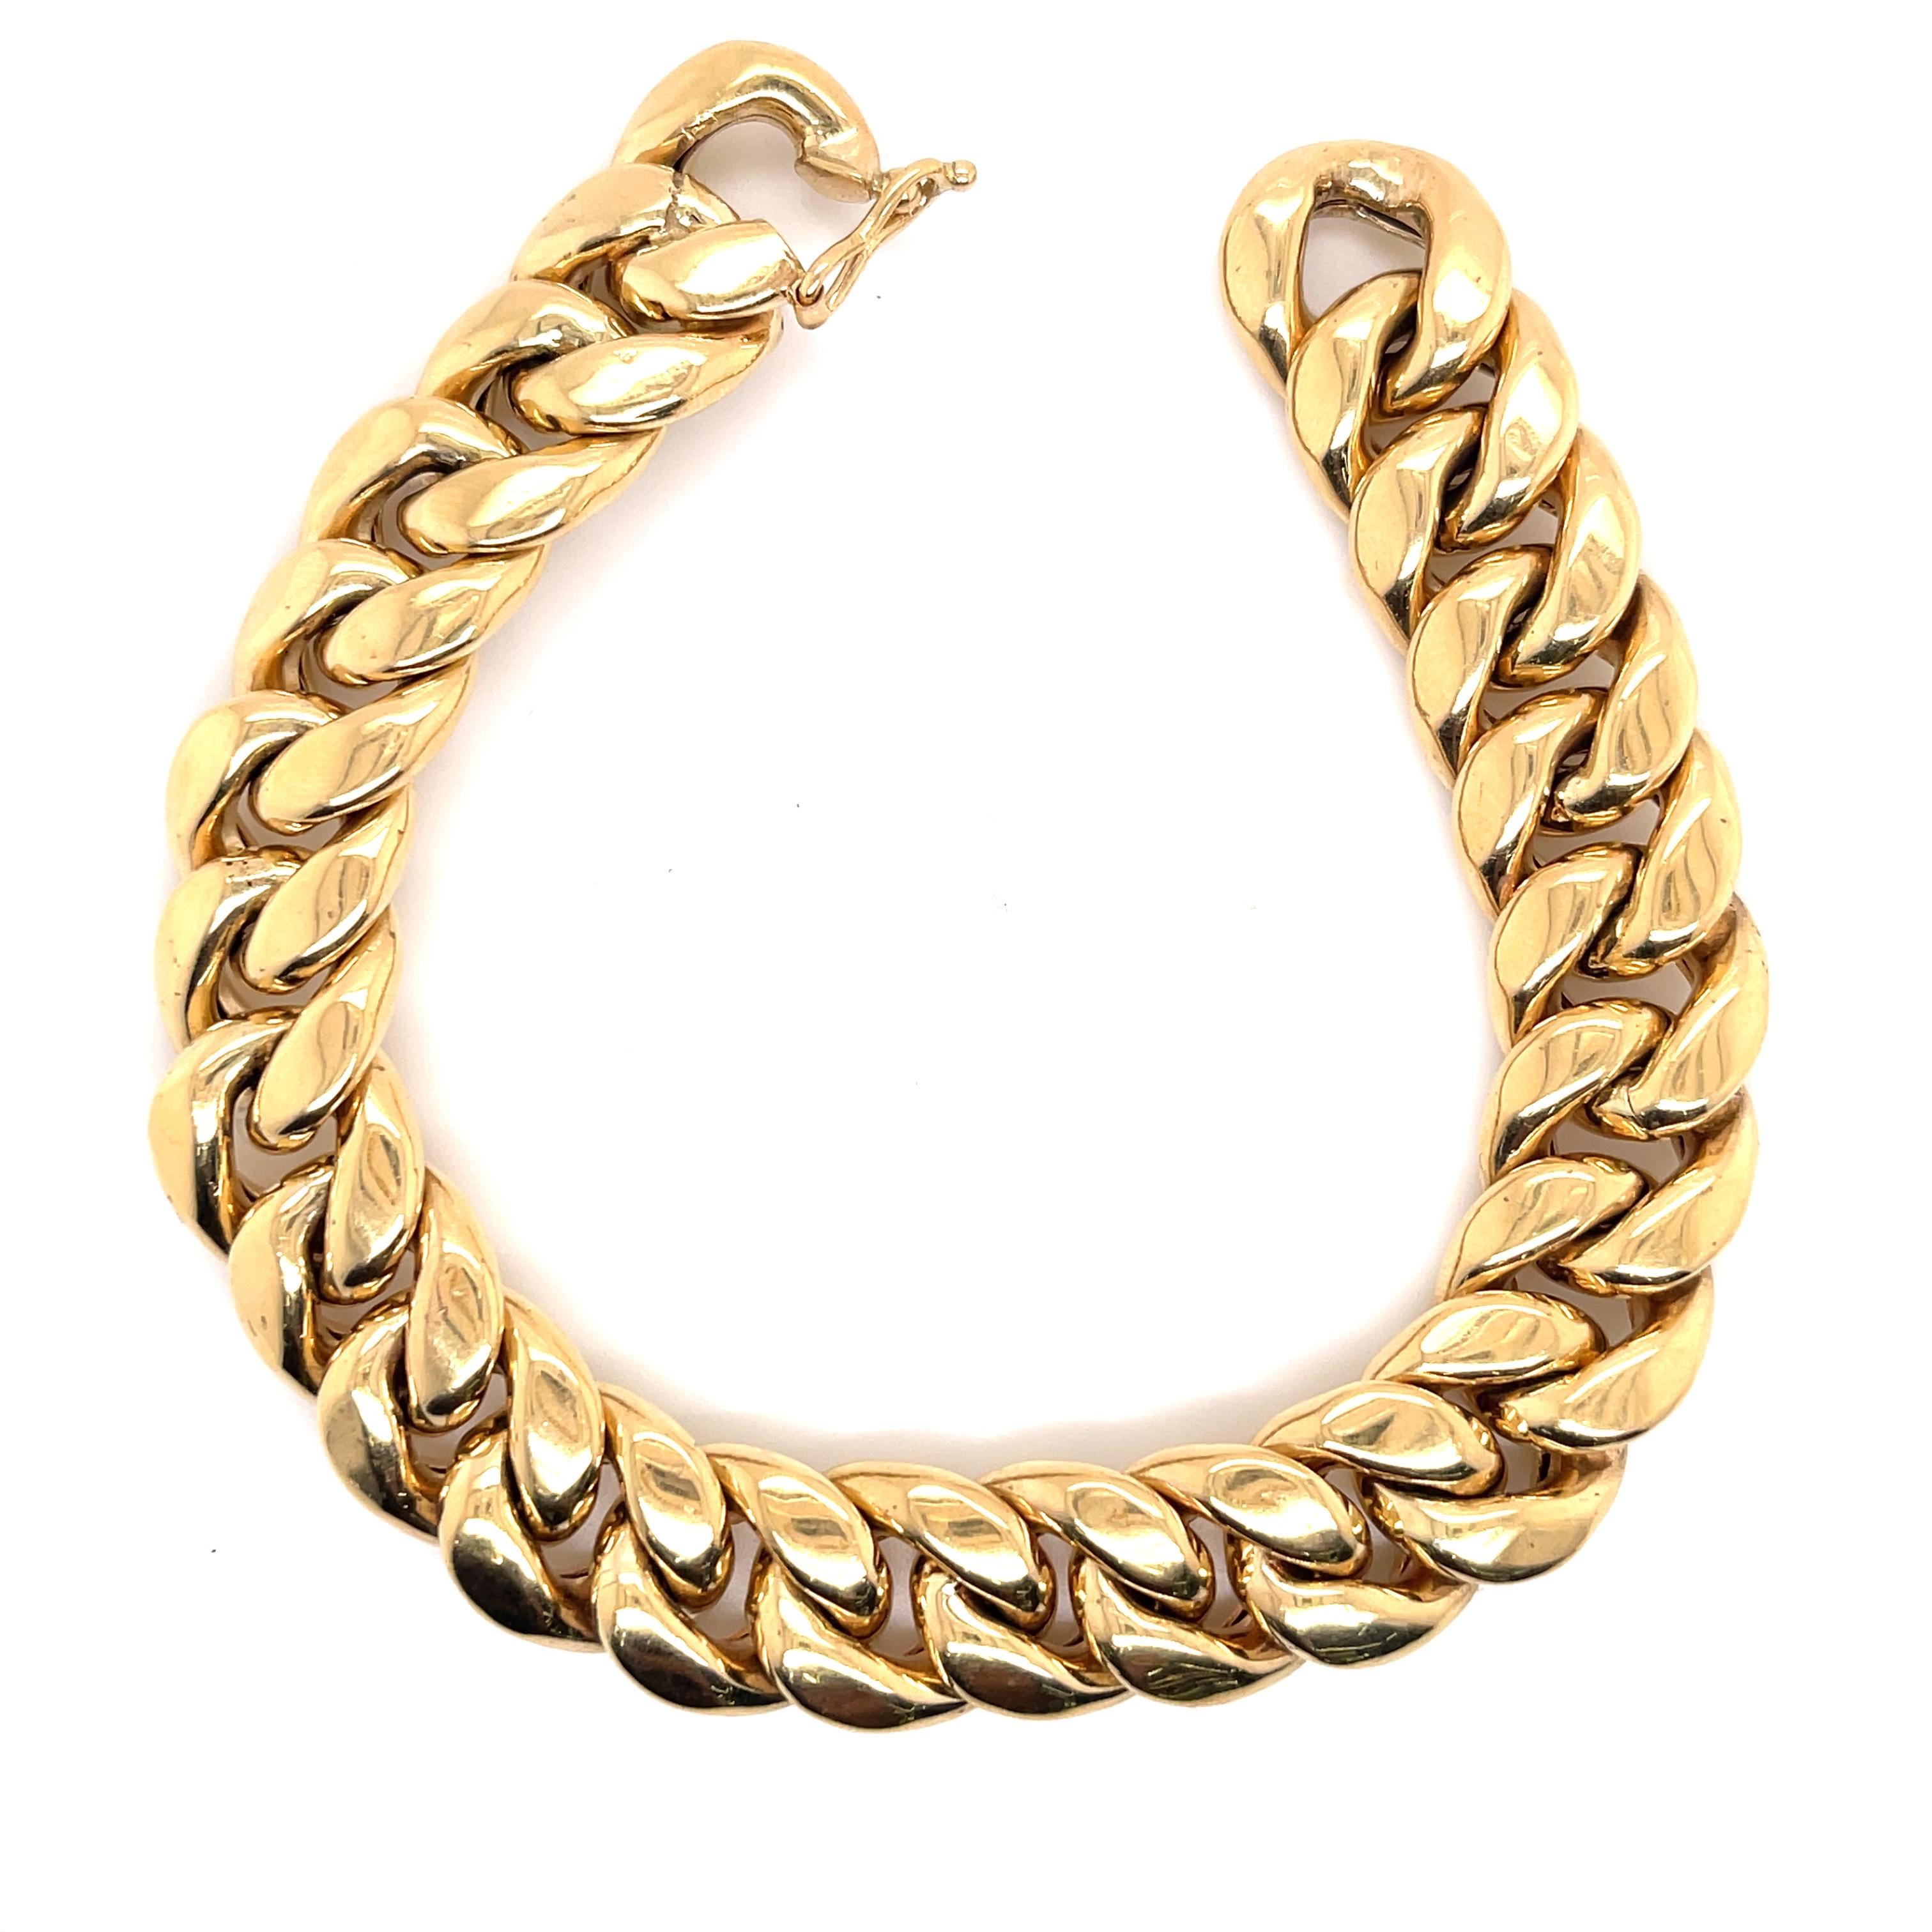 14K Yellow Gold bracelet featuring 25 Cuban Links weighing 43.32 Grams. 
Great for a Man or Woman!